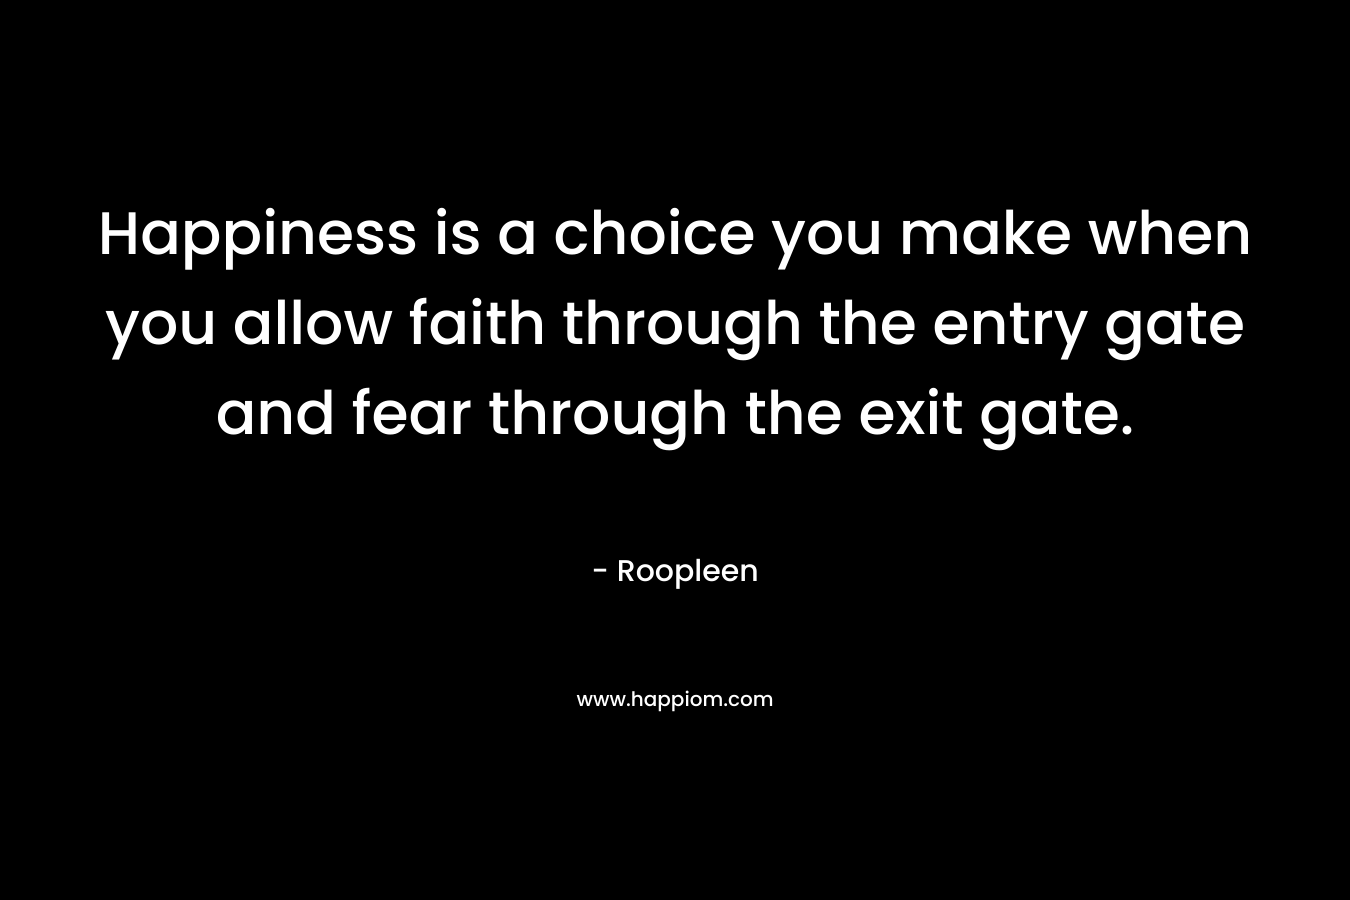 Happiness is a choice you make when you allow faith through the entry gate and fear through the exit gate. – Roopleen